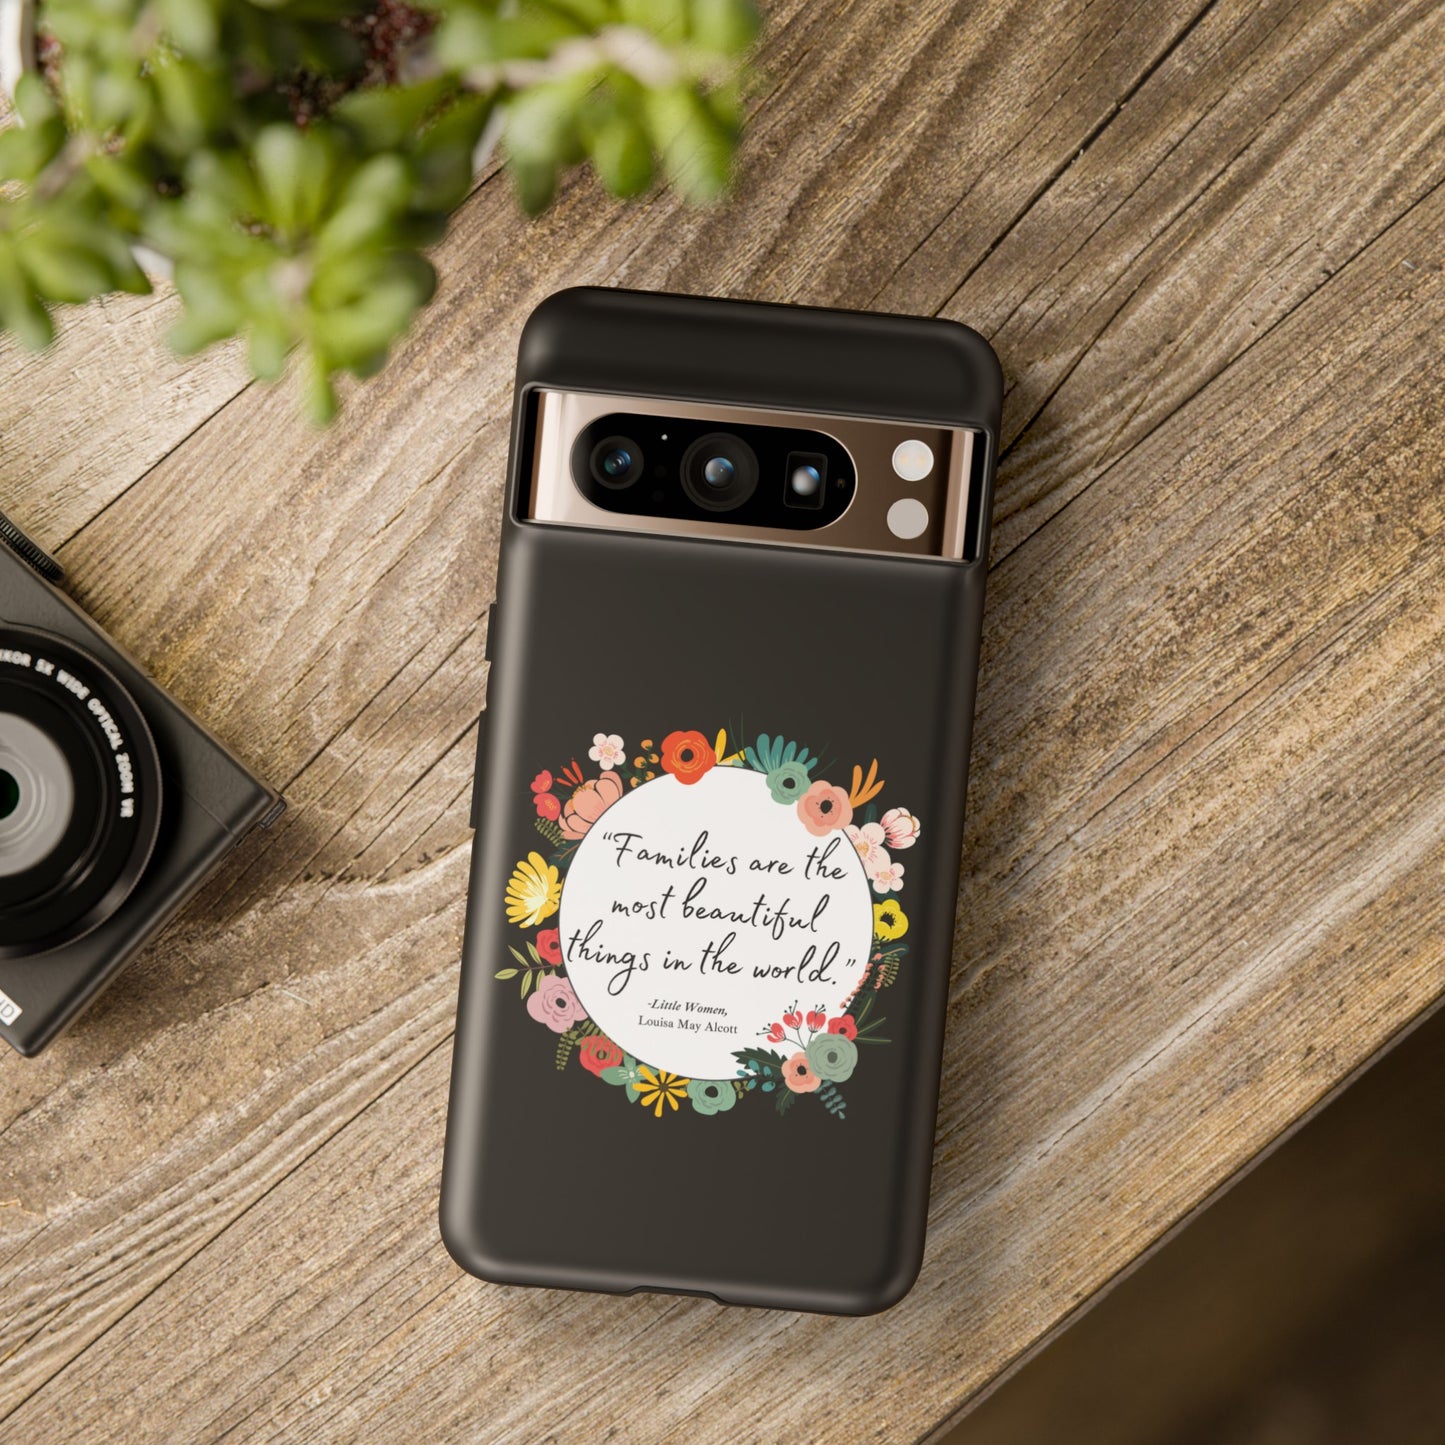 Families Are The Most Beautiful Things Phone Case - Little Women